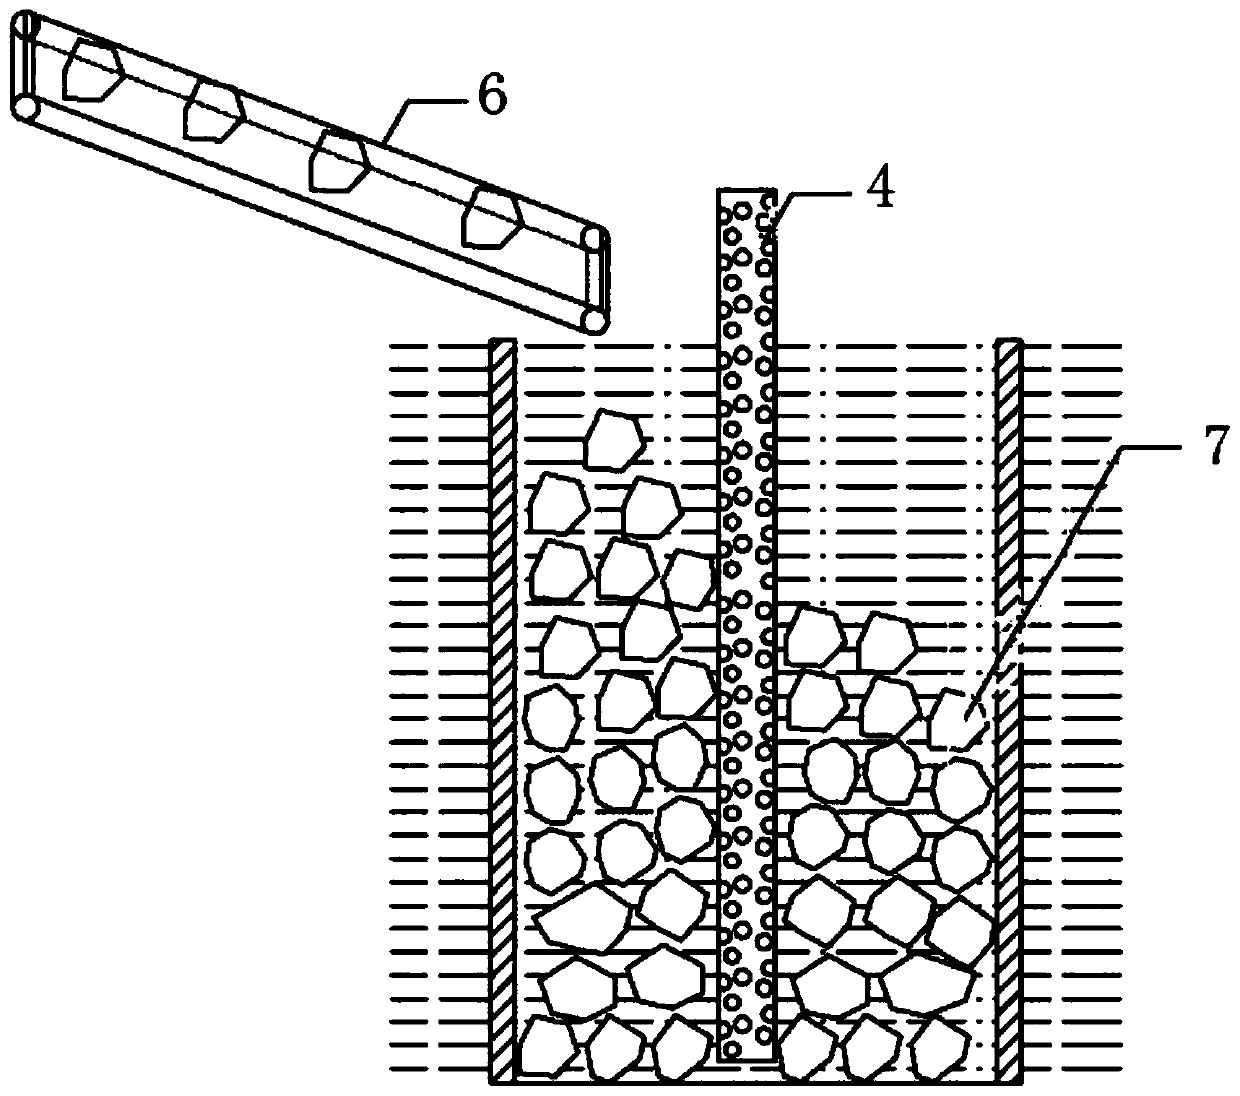 Construction method of underwater concrete grouting